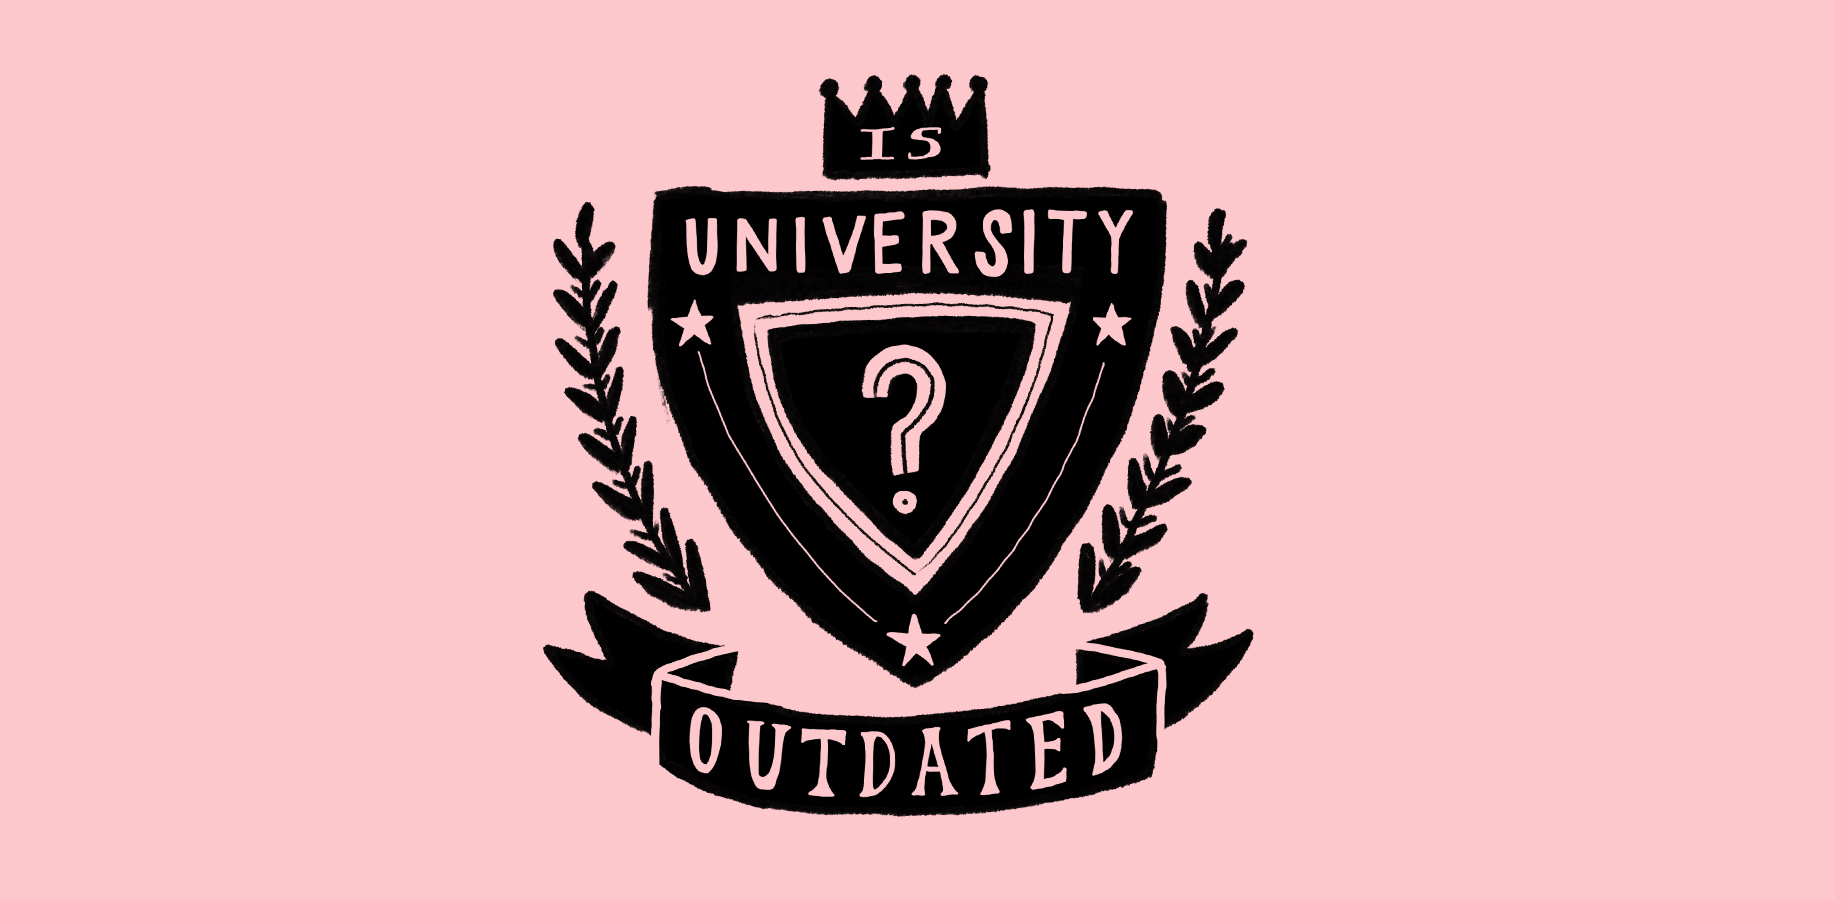 sidebyside_is_uni_outdated1